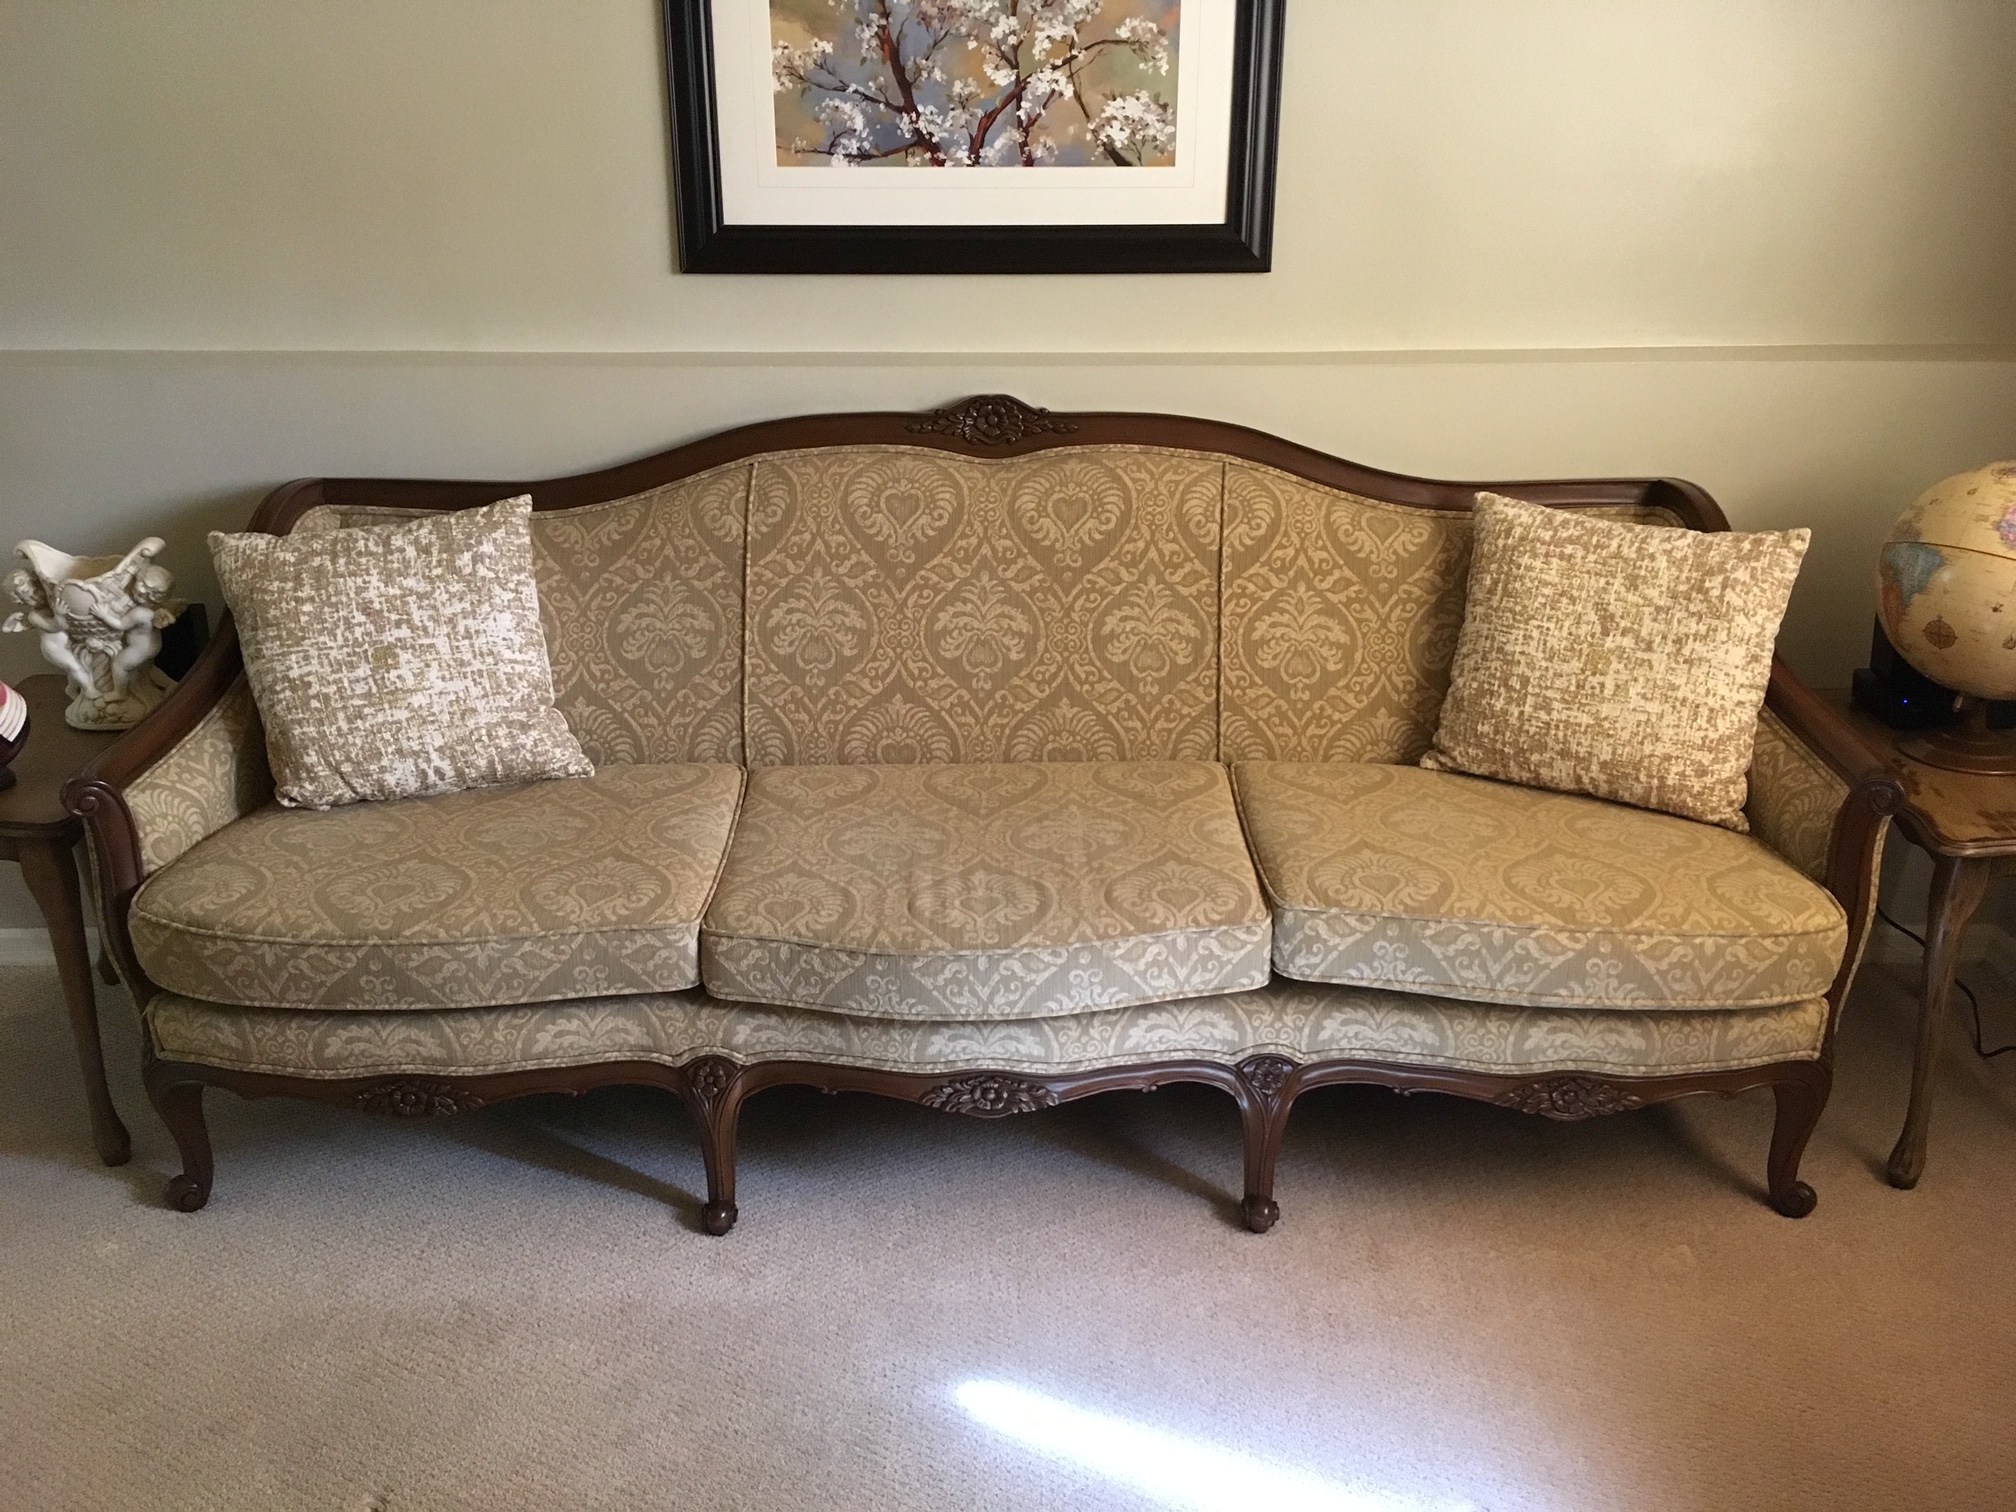 French Provincial Sofa - AM Furniture in Surrey, New Westminster, Burnaby, Vancouver, Coquitlam